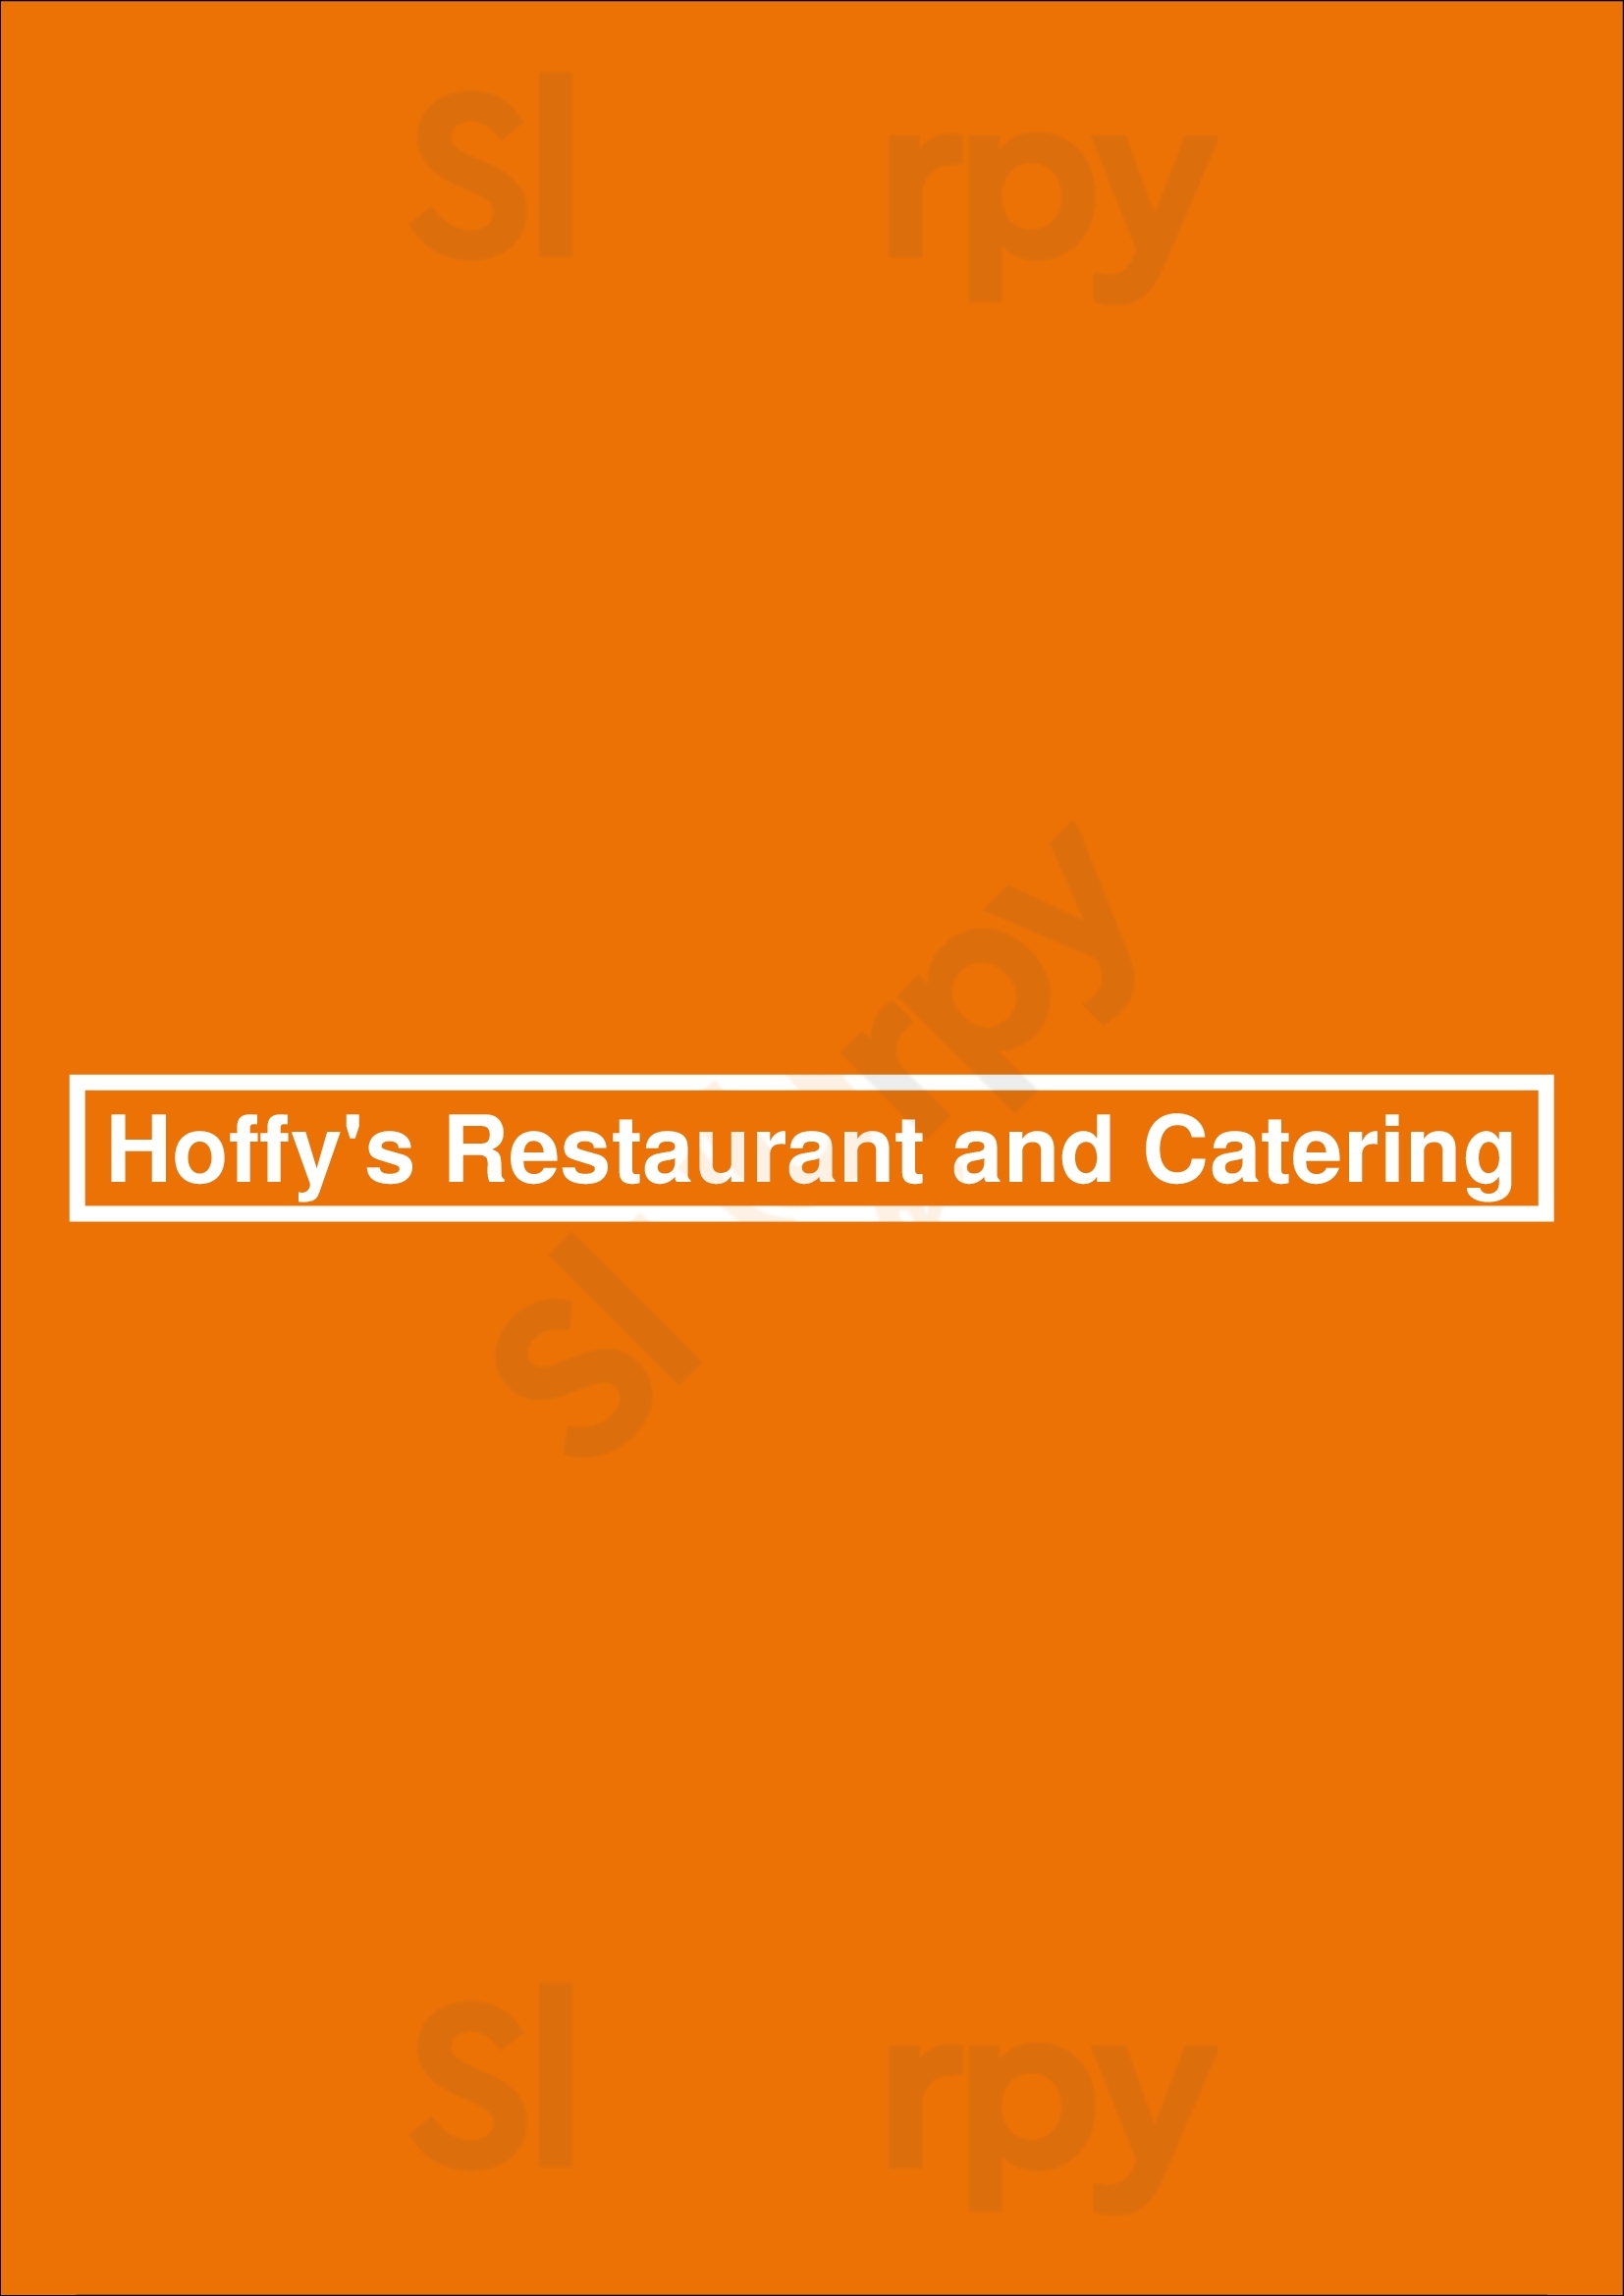 Hoffy's Restaurant And Catering Anvers Menu - 1